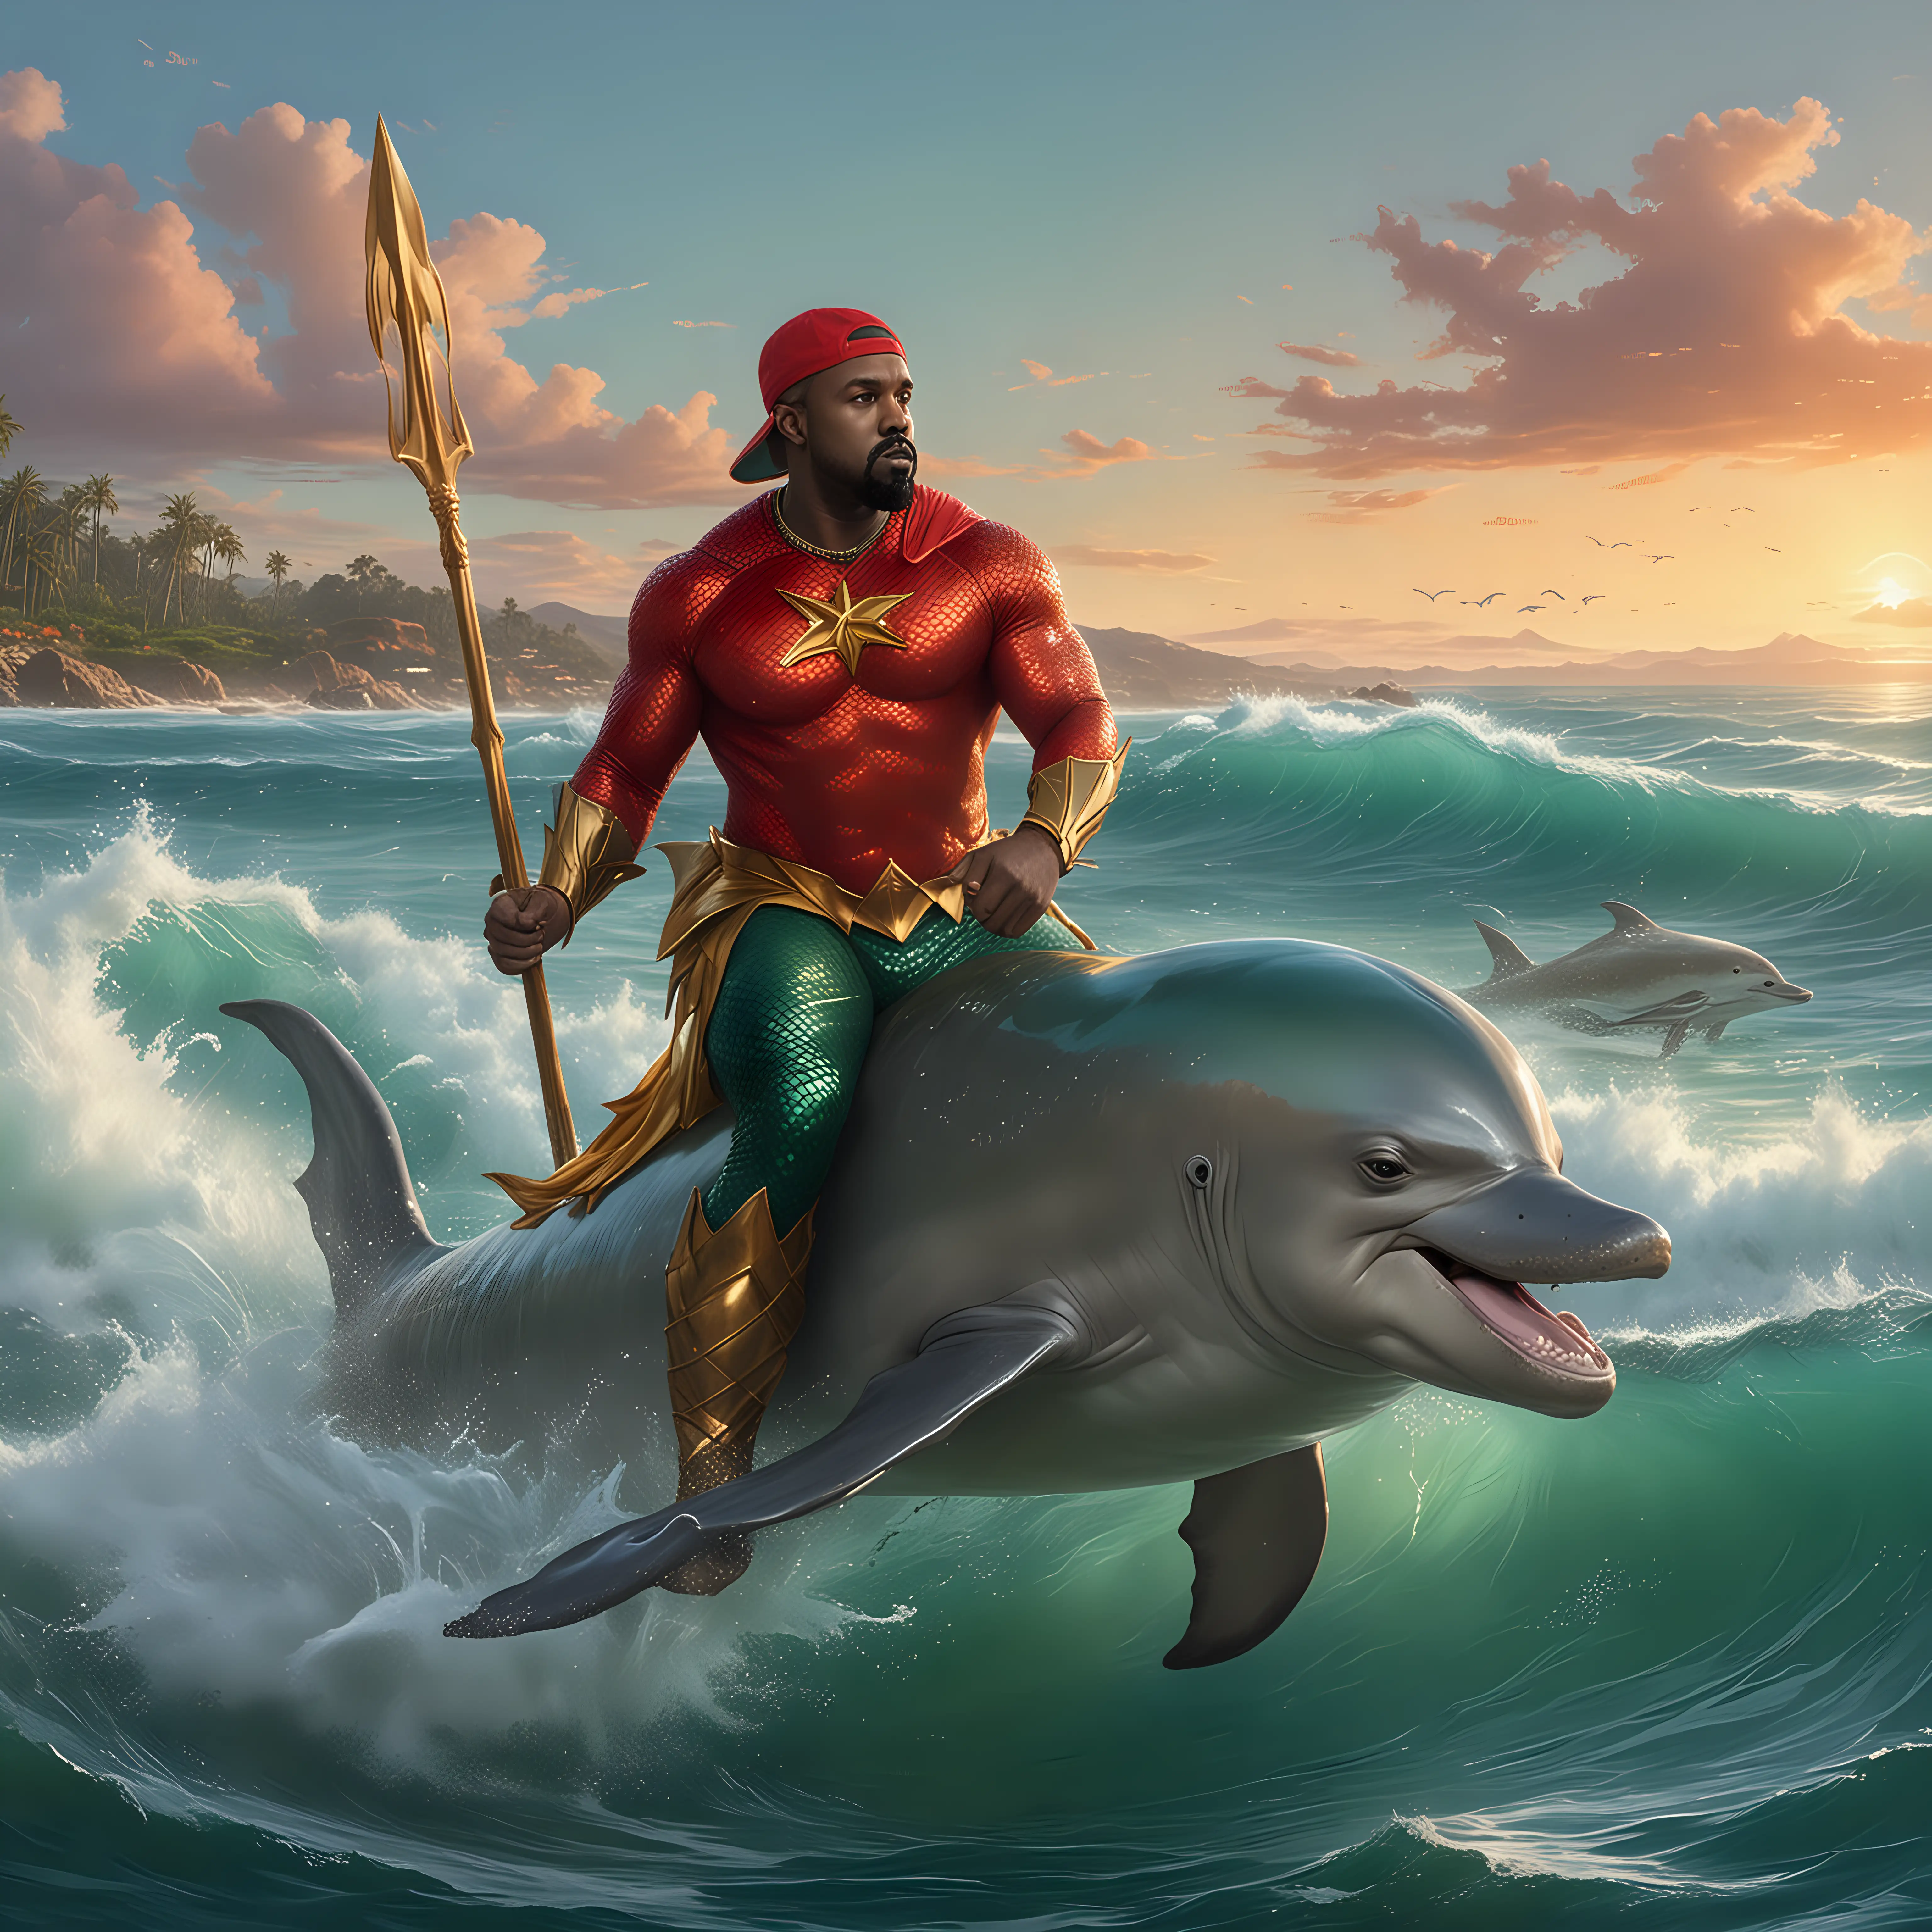 in the style of an oil painting, create an image of kanye west dressed as aquaman, while riding a dolphin in the ocean. Have him wearing a red baseball cap.